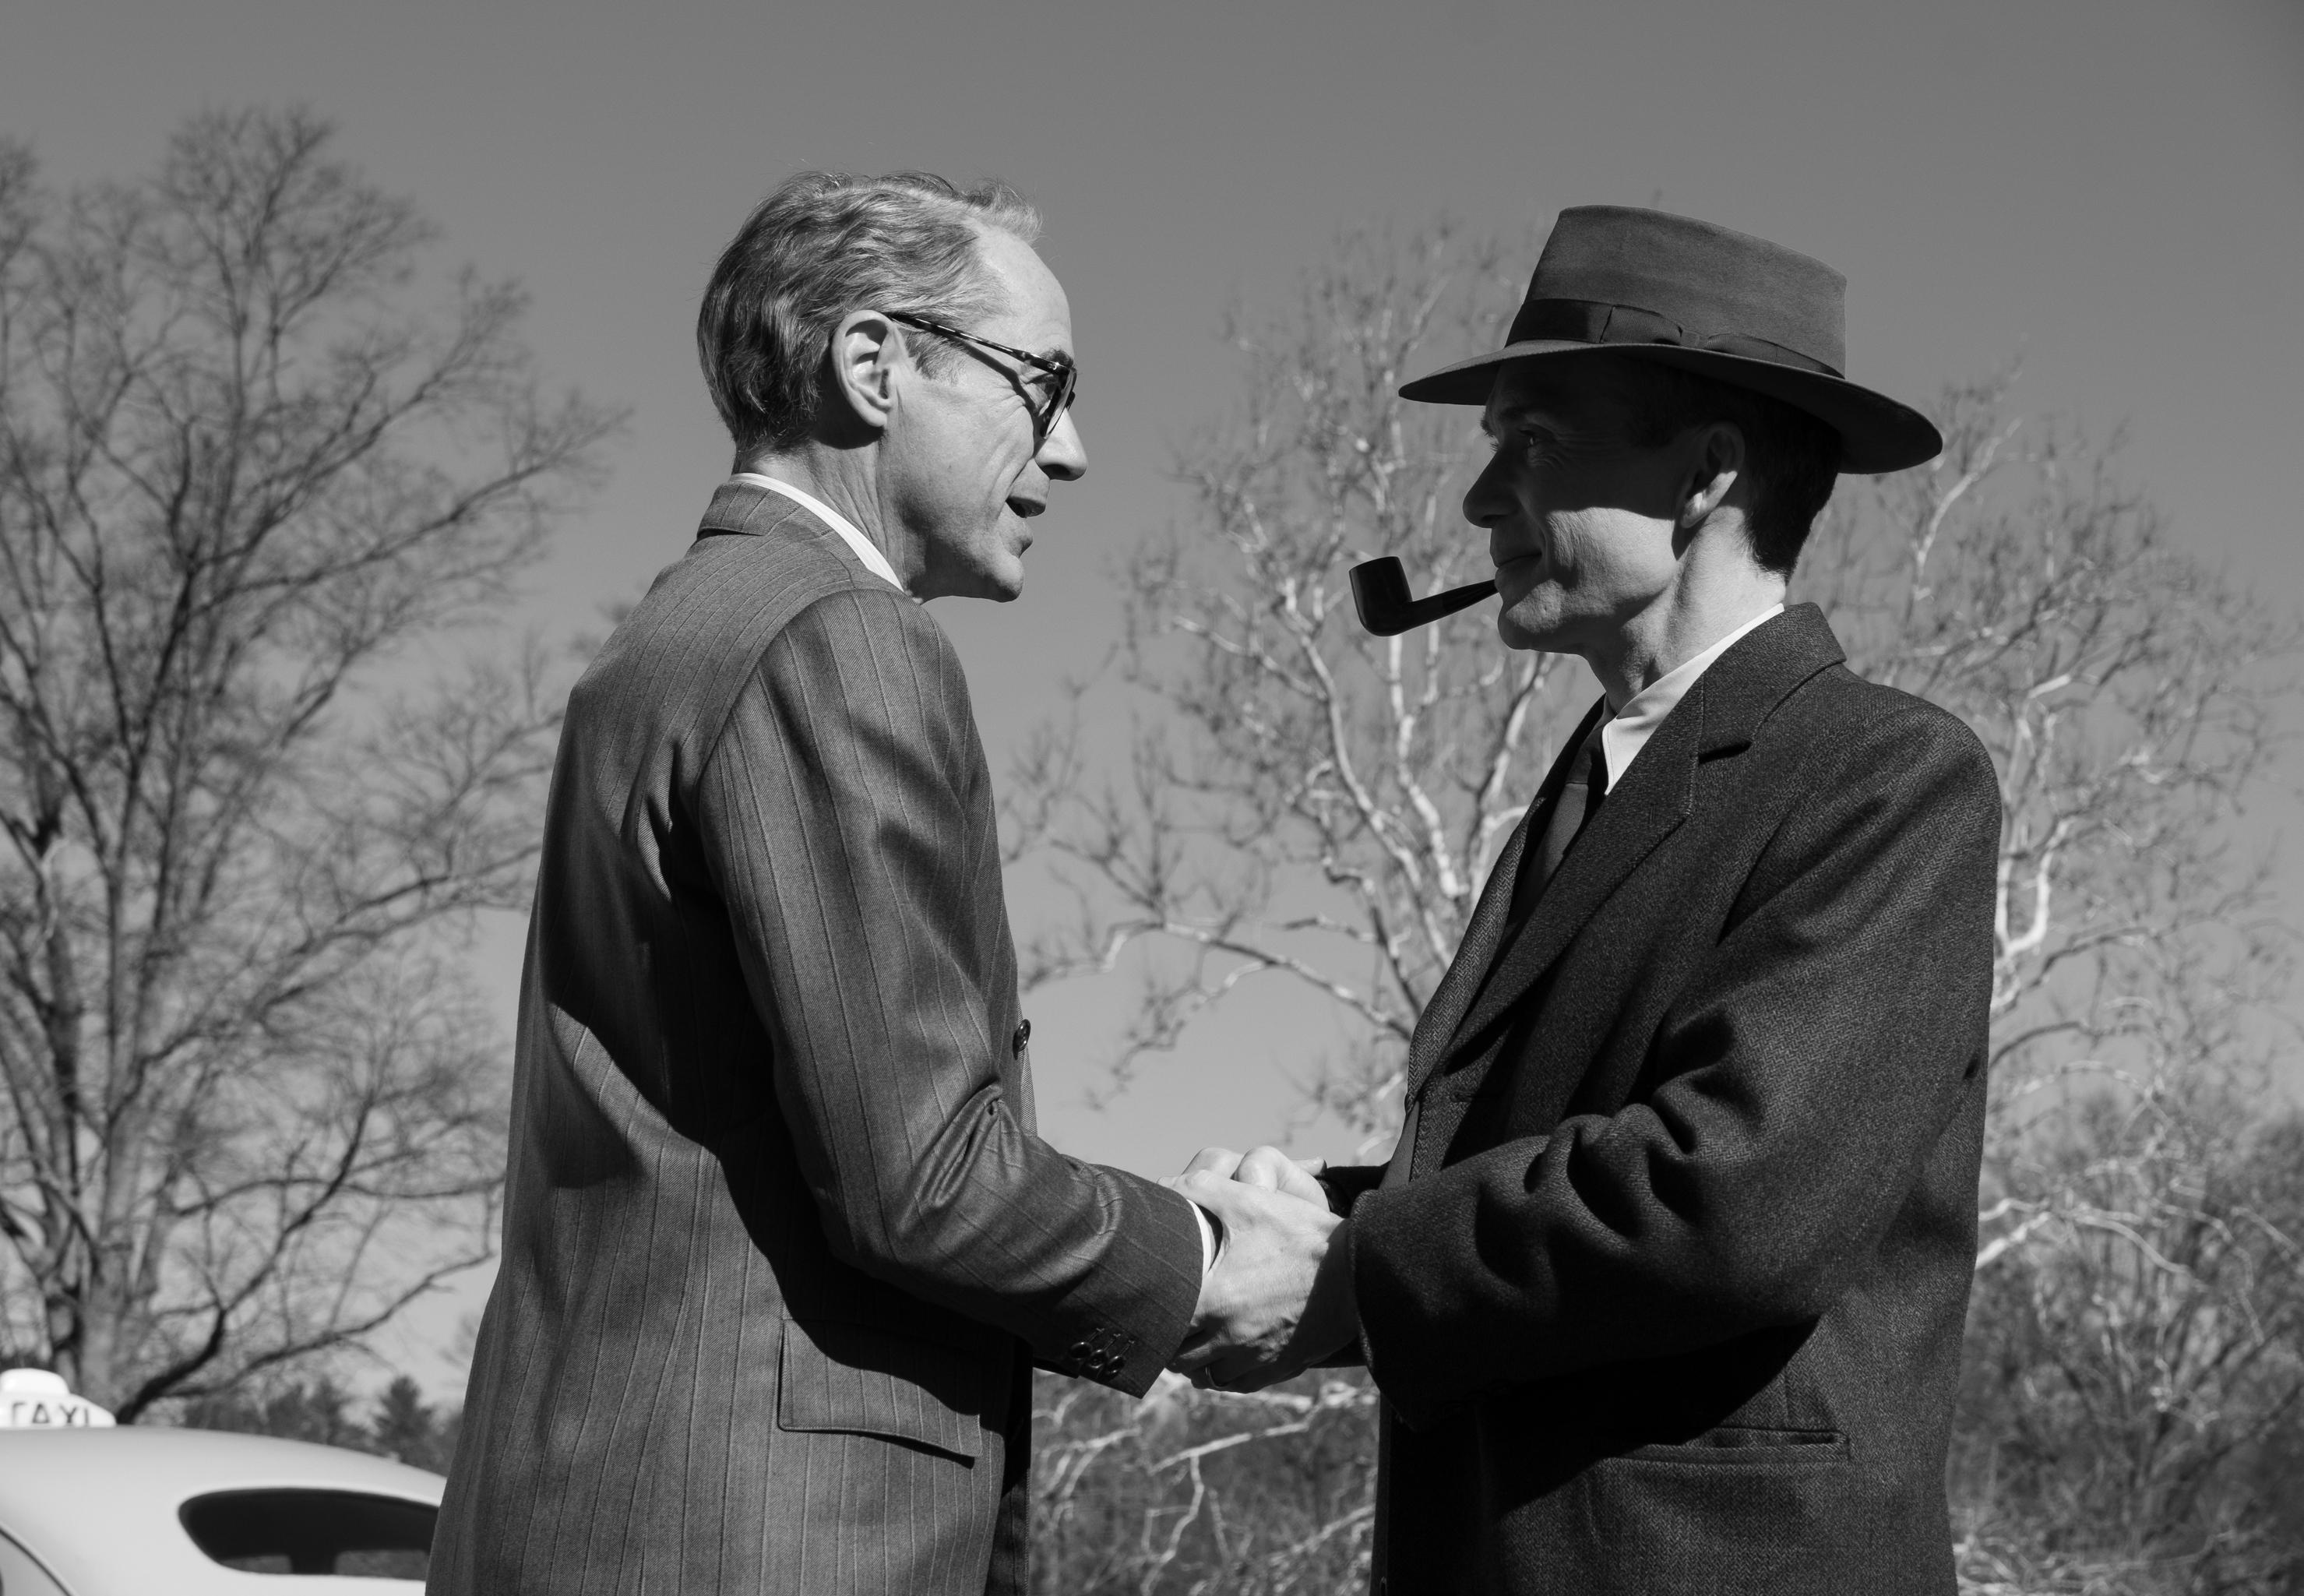 Black and white HD desktop wallpaper featuring two men in period clothing shaking hands, evoking a historical theme possibly related to the movie 'Oppenheimer'.